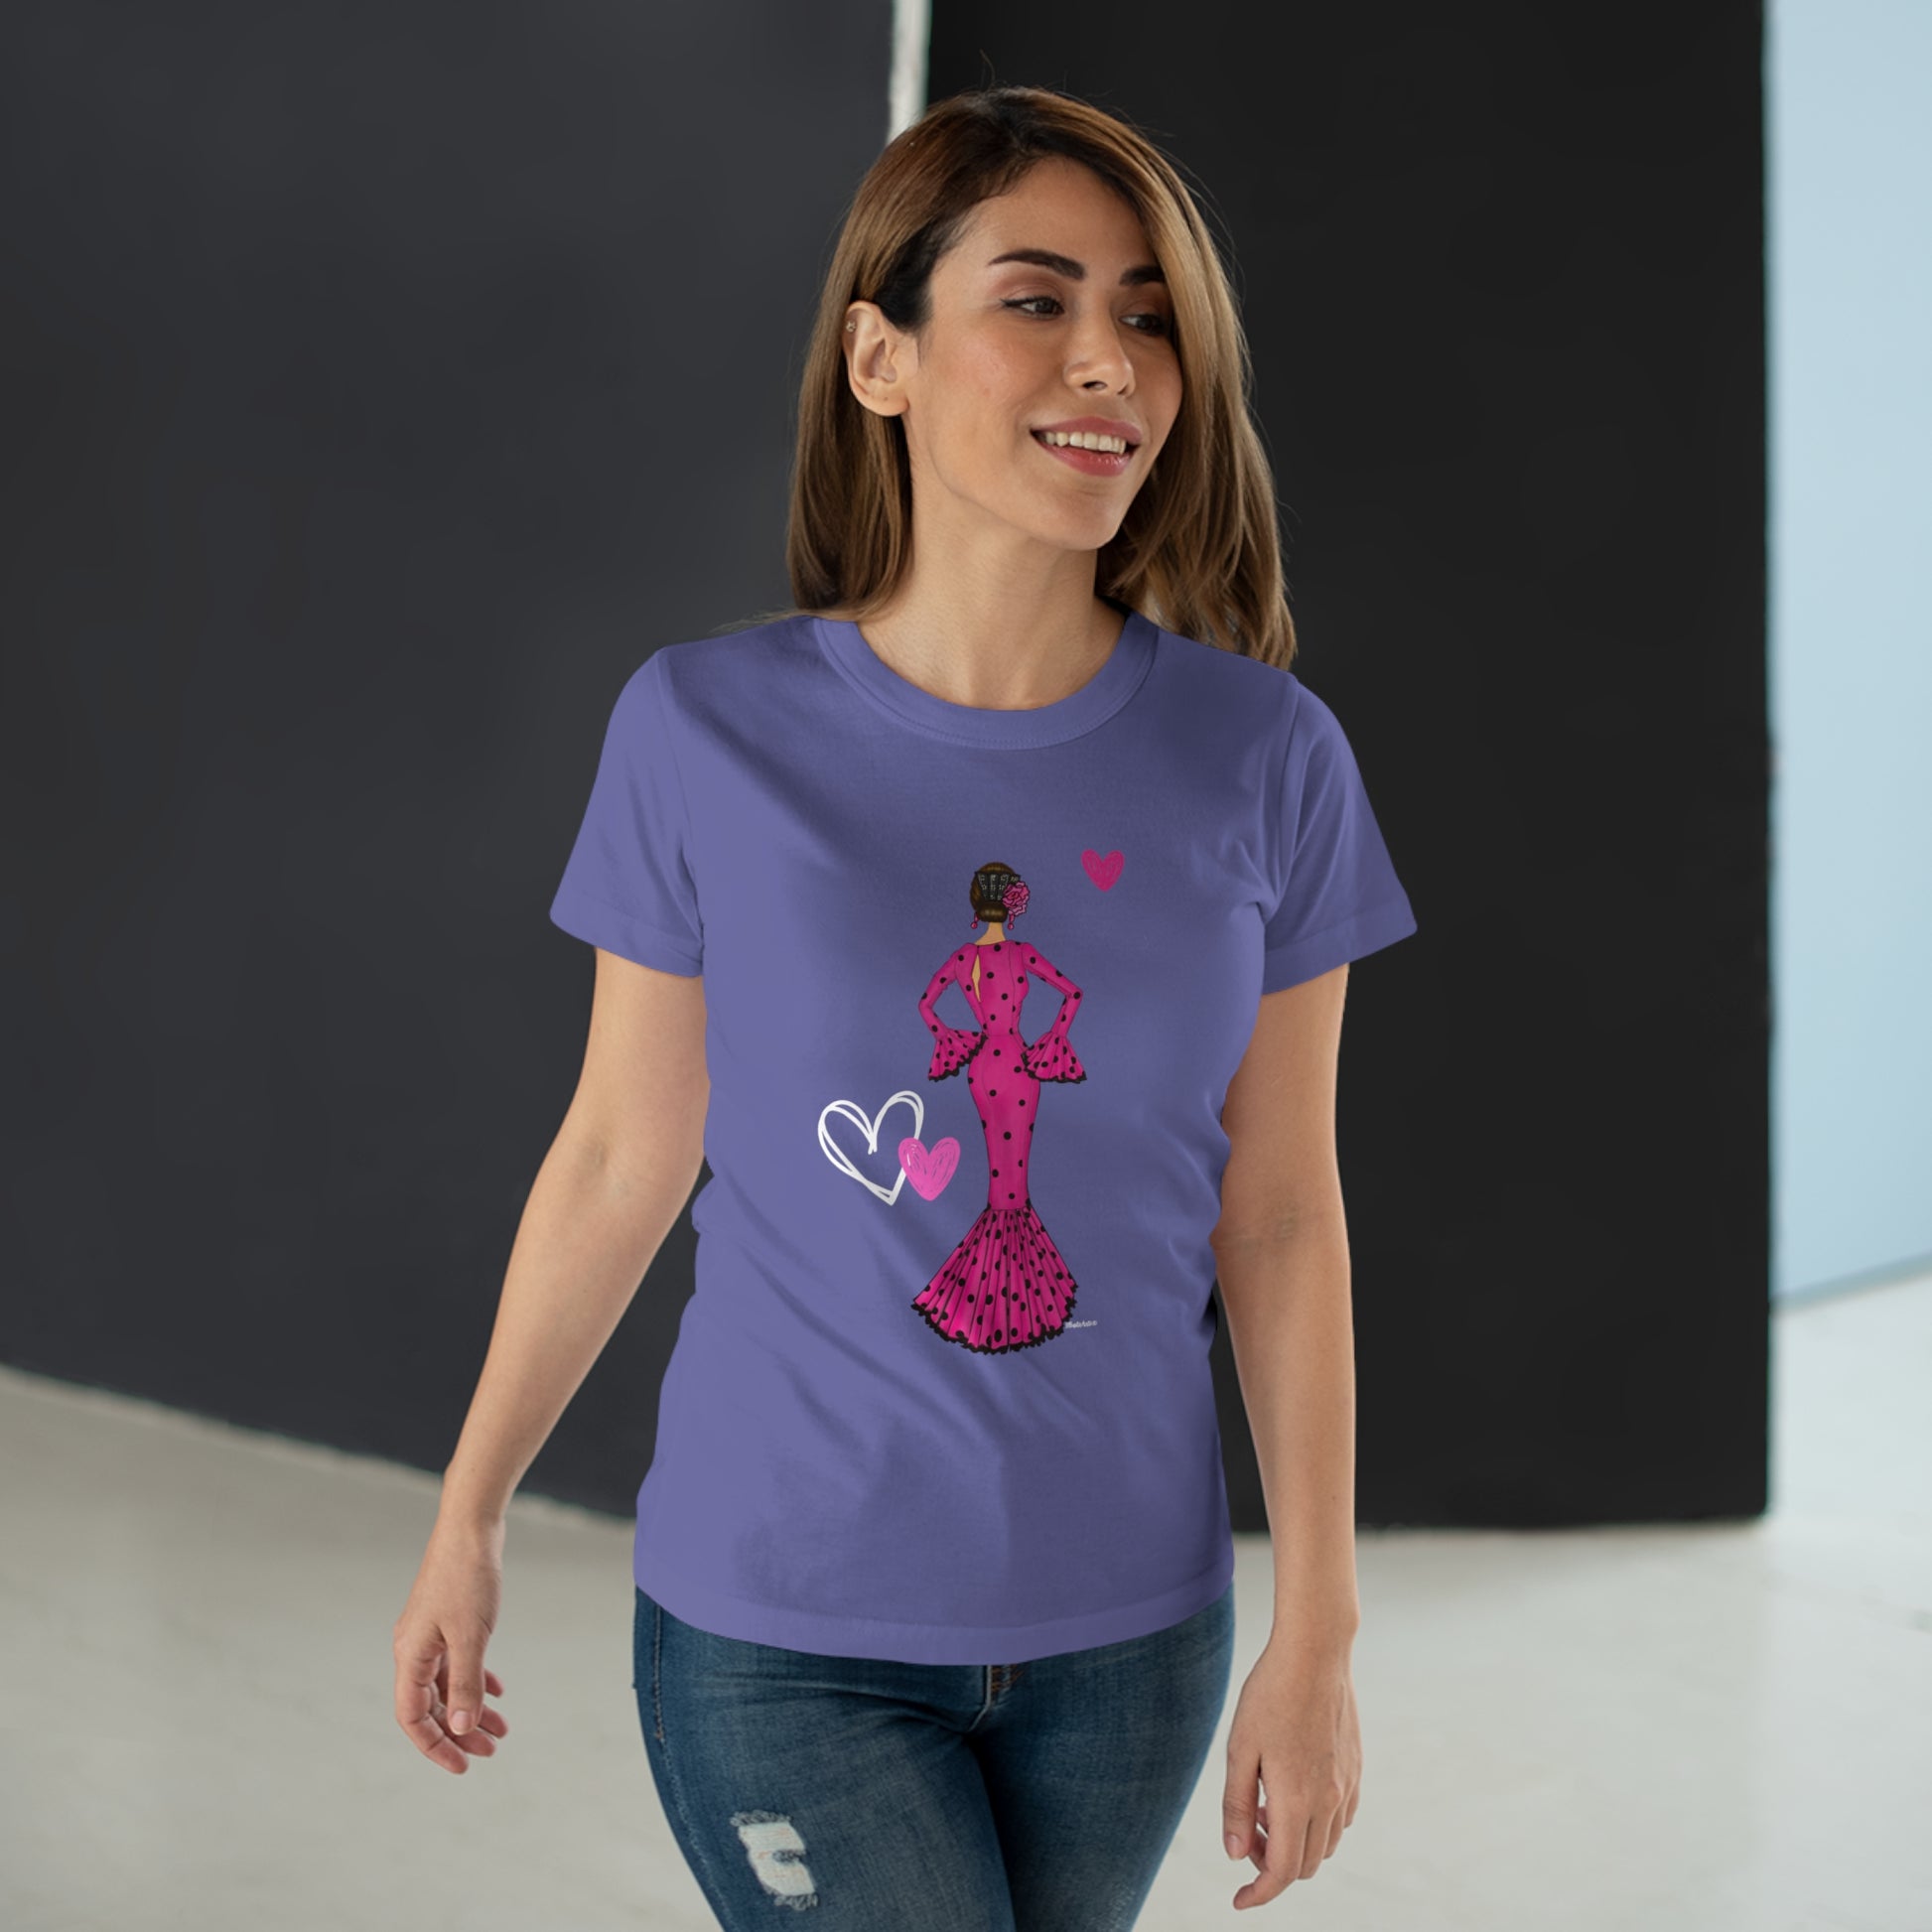 a woman wearing a purple t - shirt with a pink heart on it